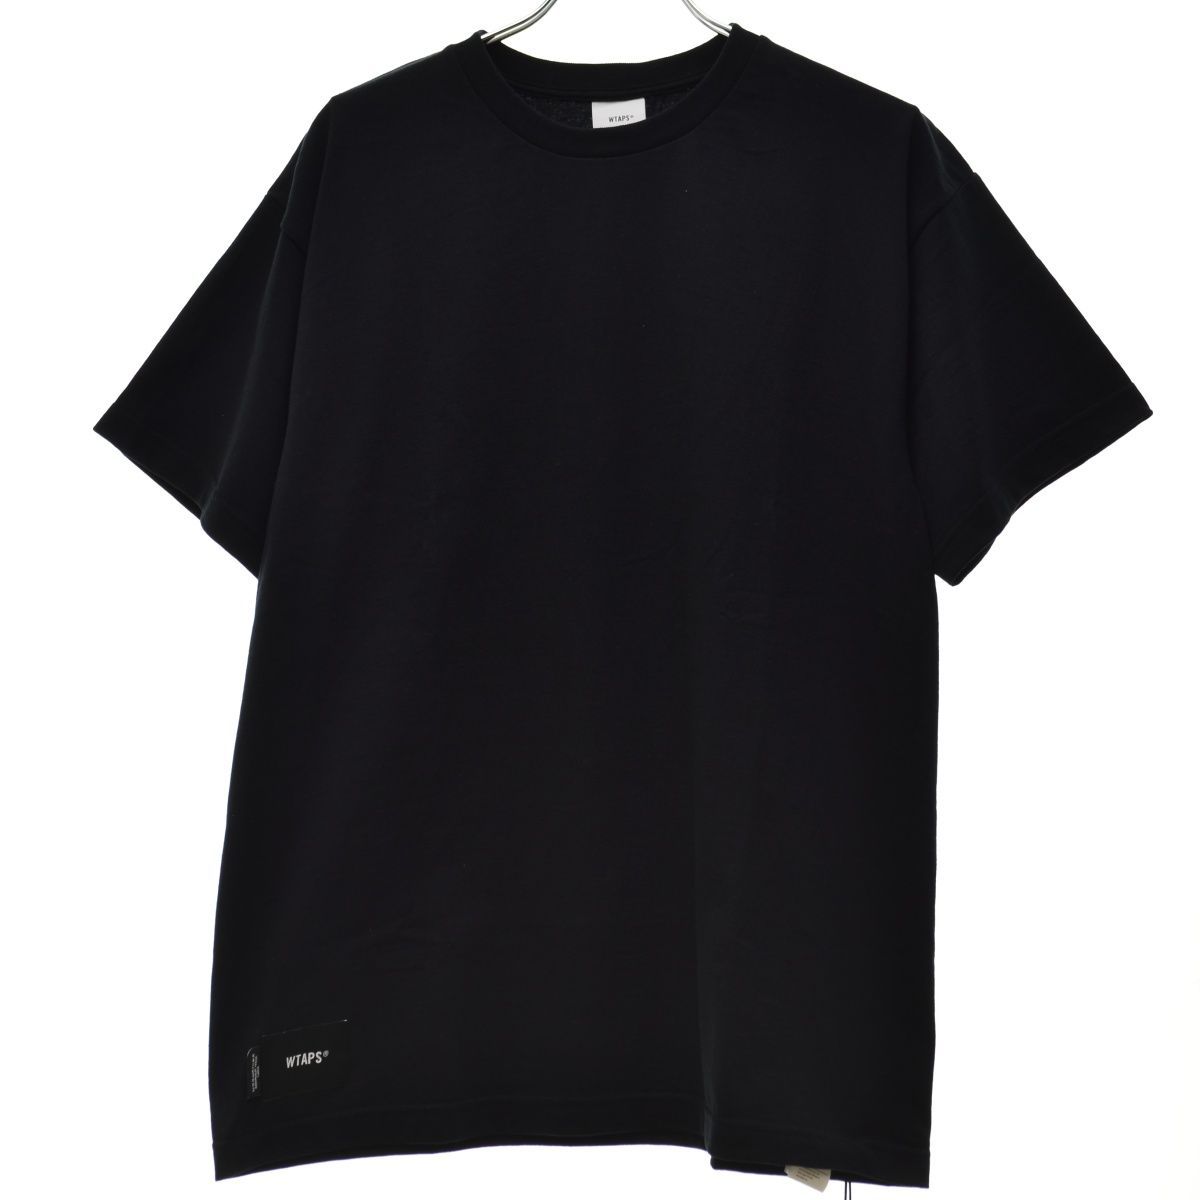 S【WTAPS / ダブルタップス 】23SS SNEAK 231ATDT-STM08S LABEL / SS 